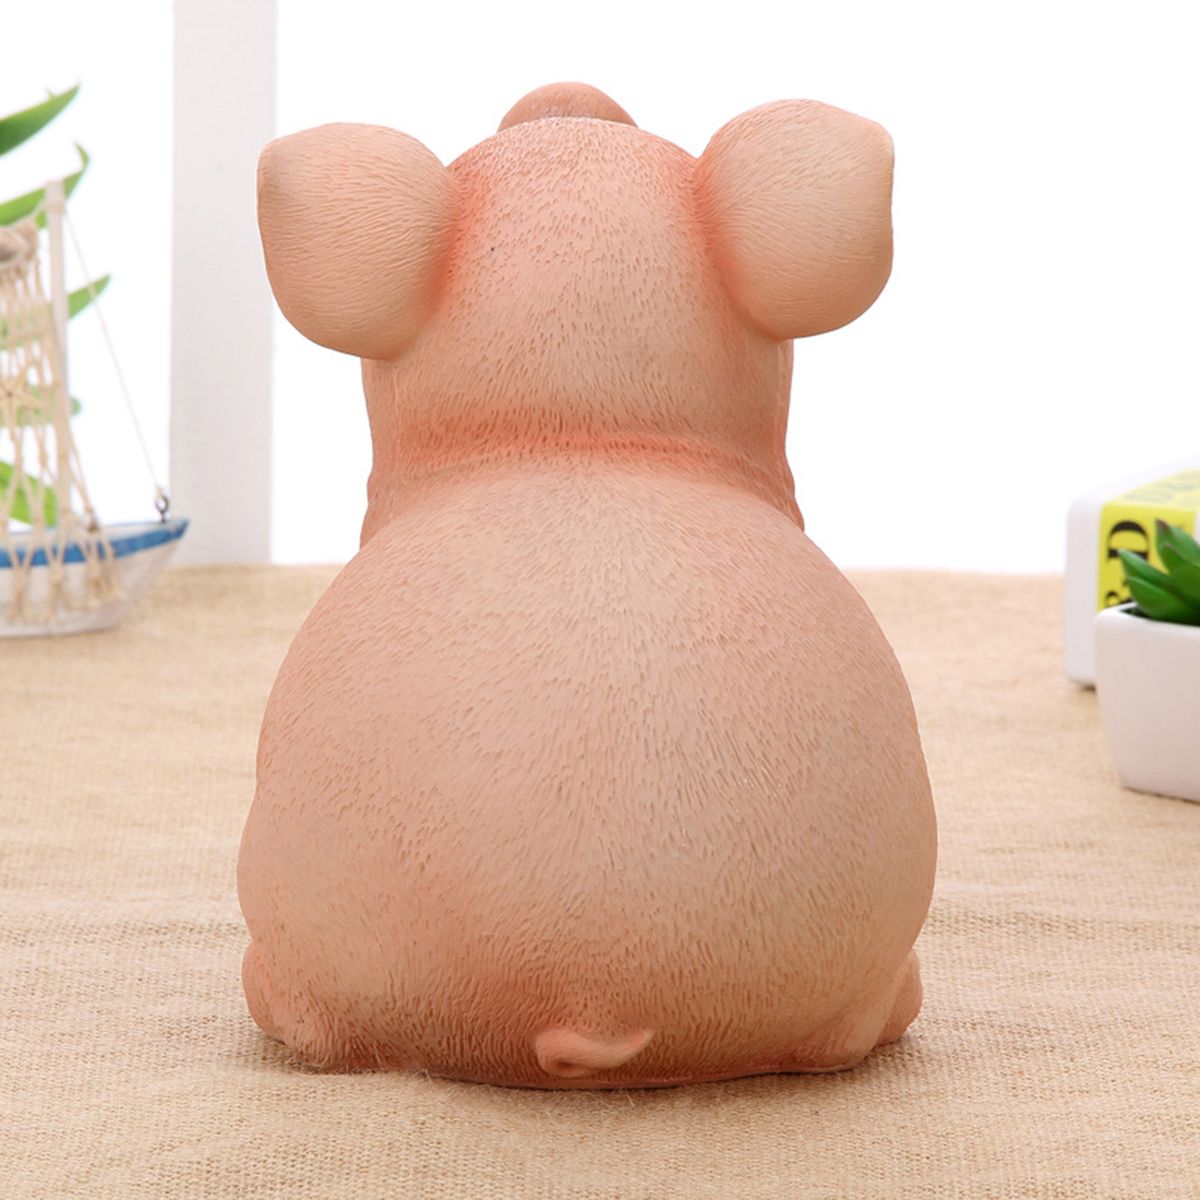 Piggy-Bank-Resin-Craft-Coin-Bank-Money-Saving-Holder-Box-Gifts-for-Kids-Decorations-1546932